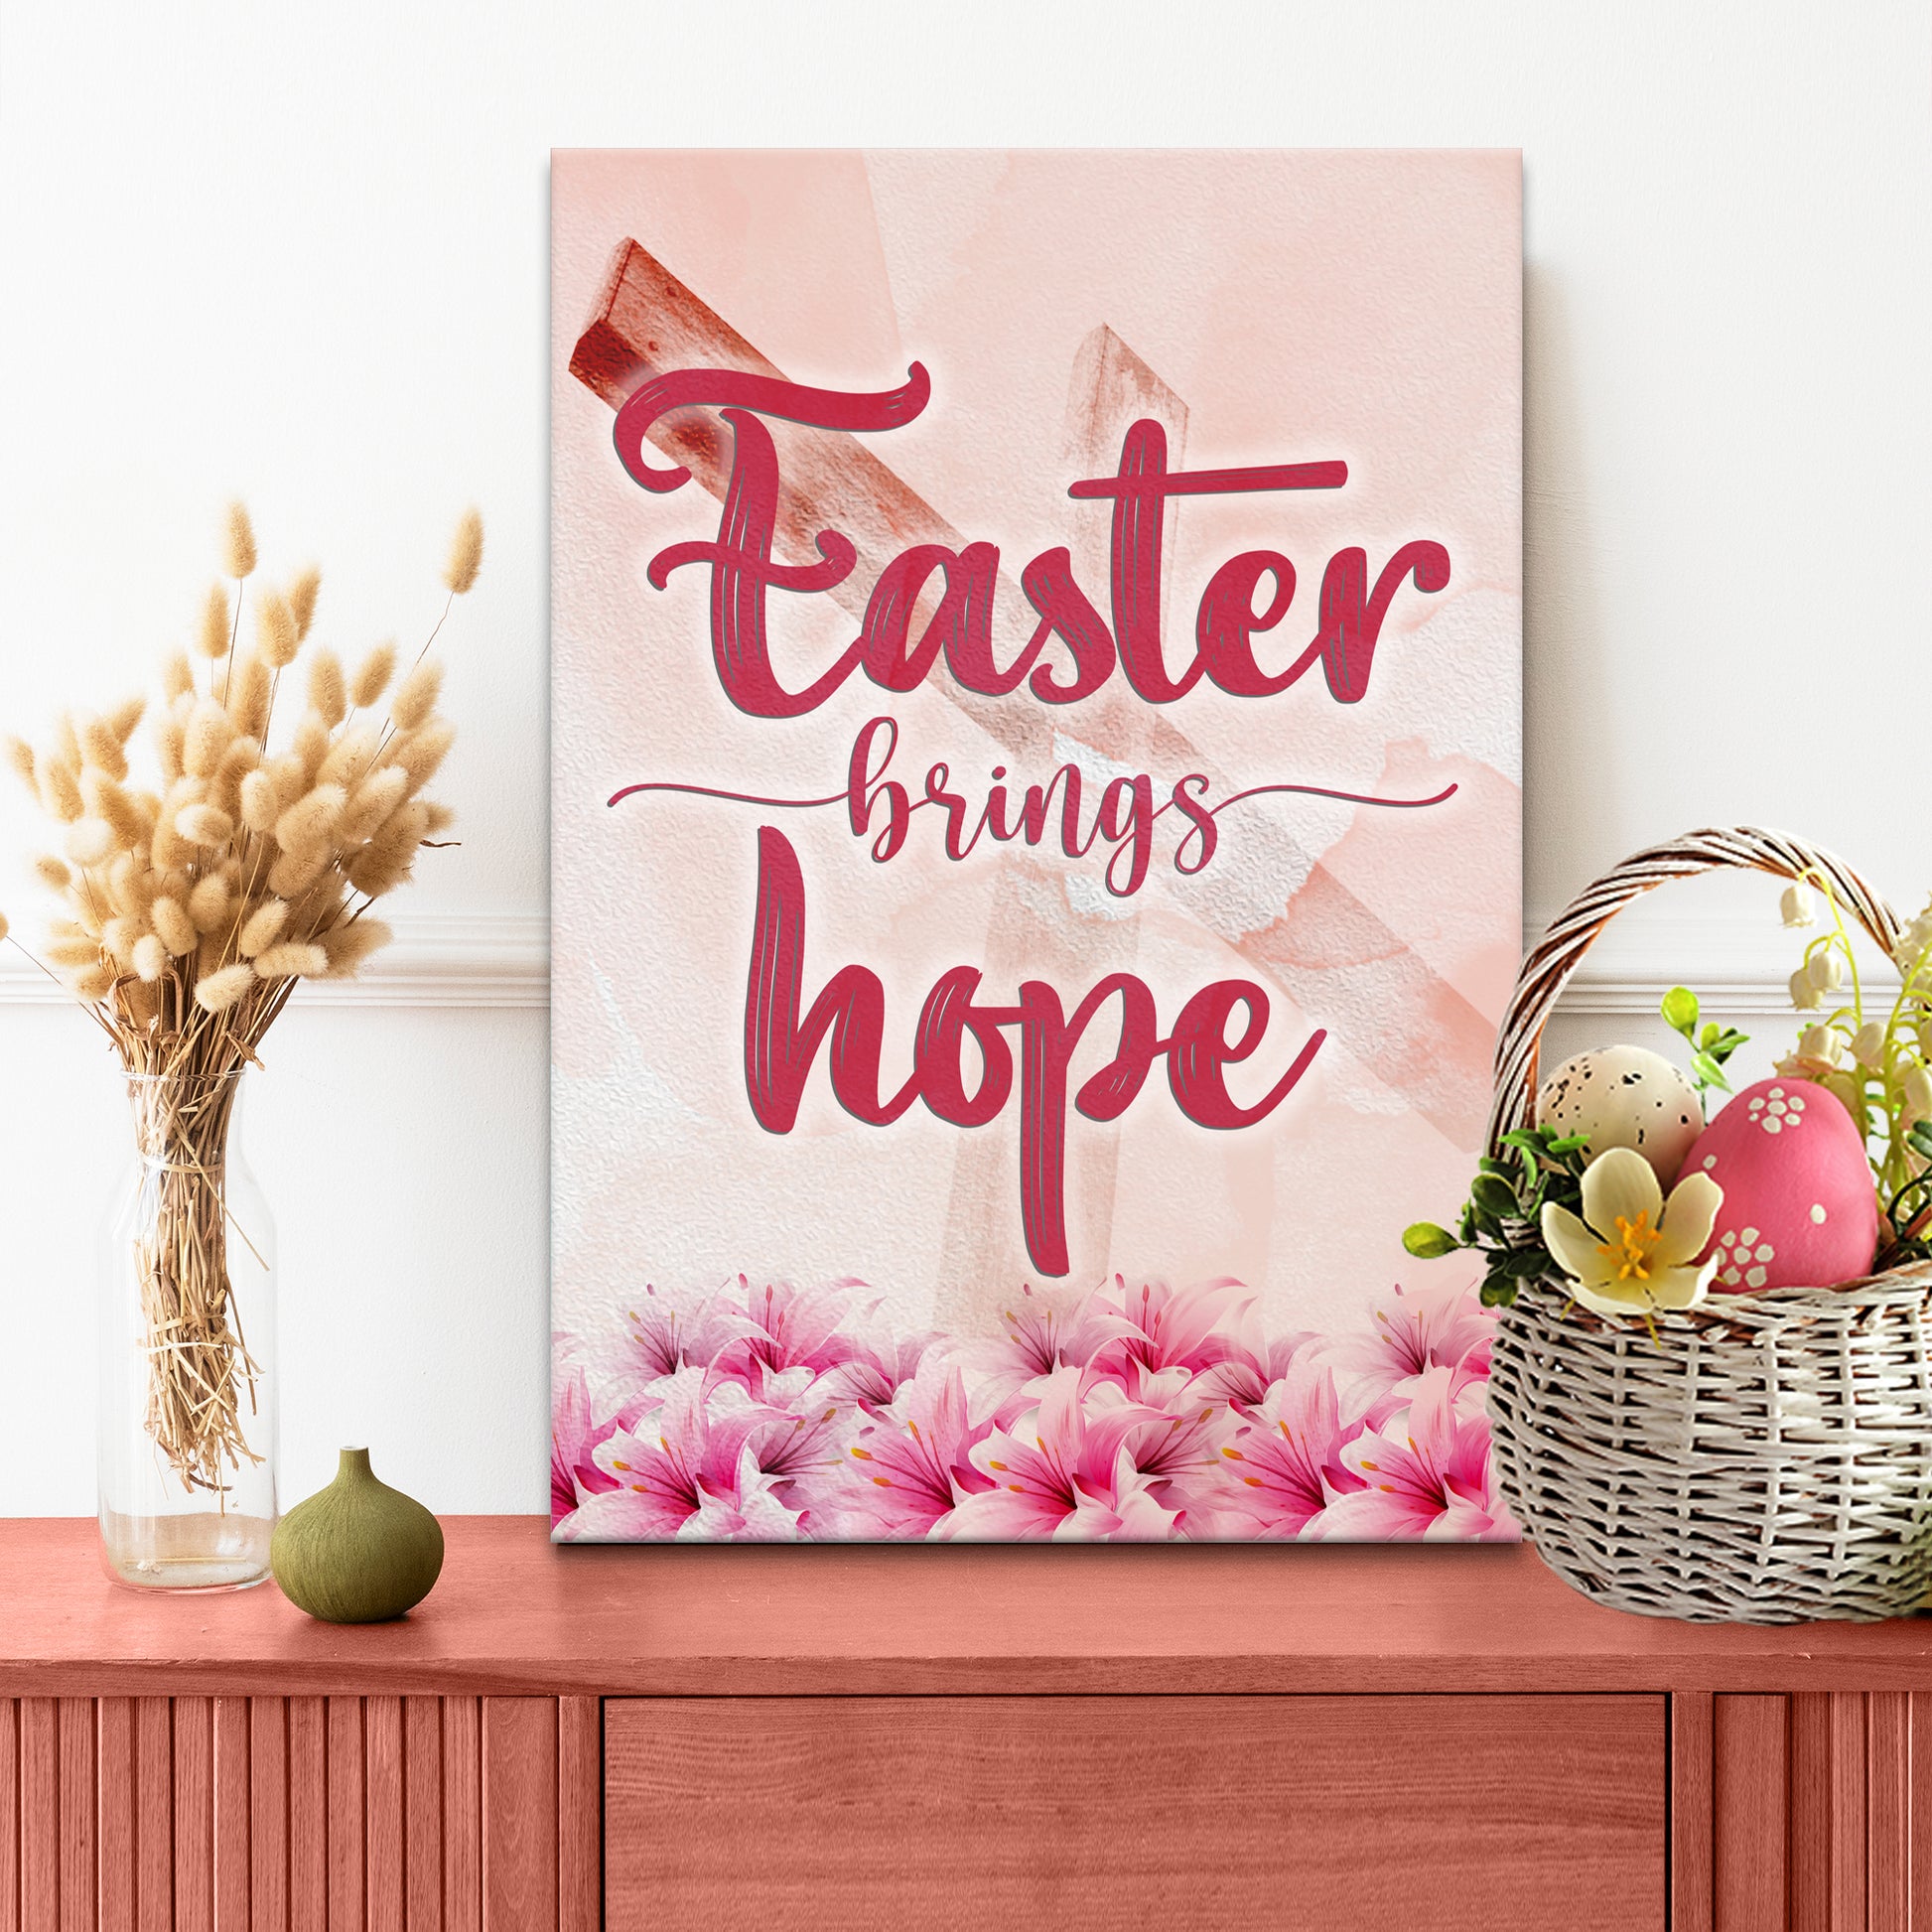 Easter Brings Hope Sign - Image by Tailored Canvases